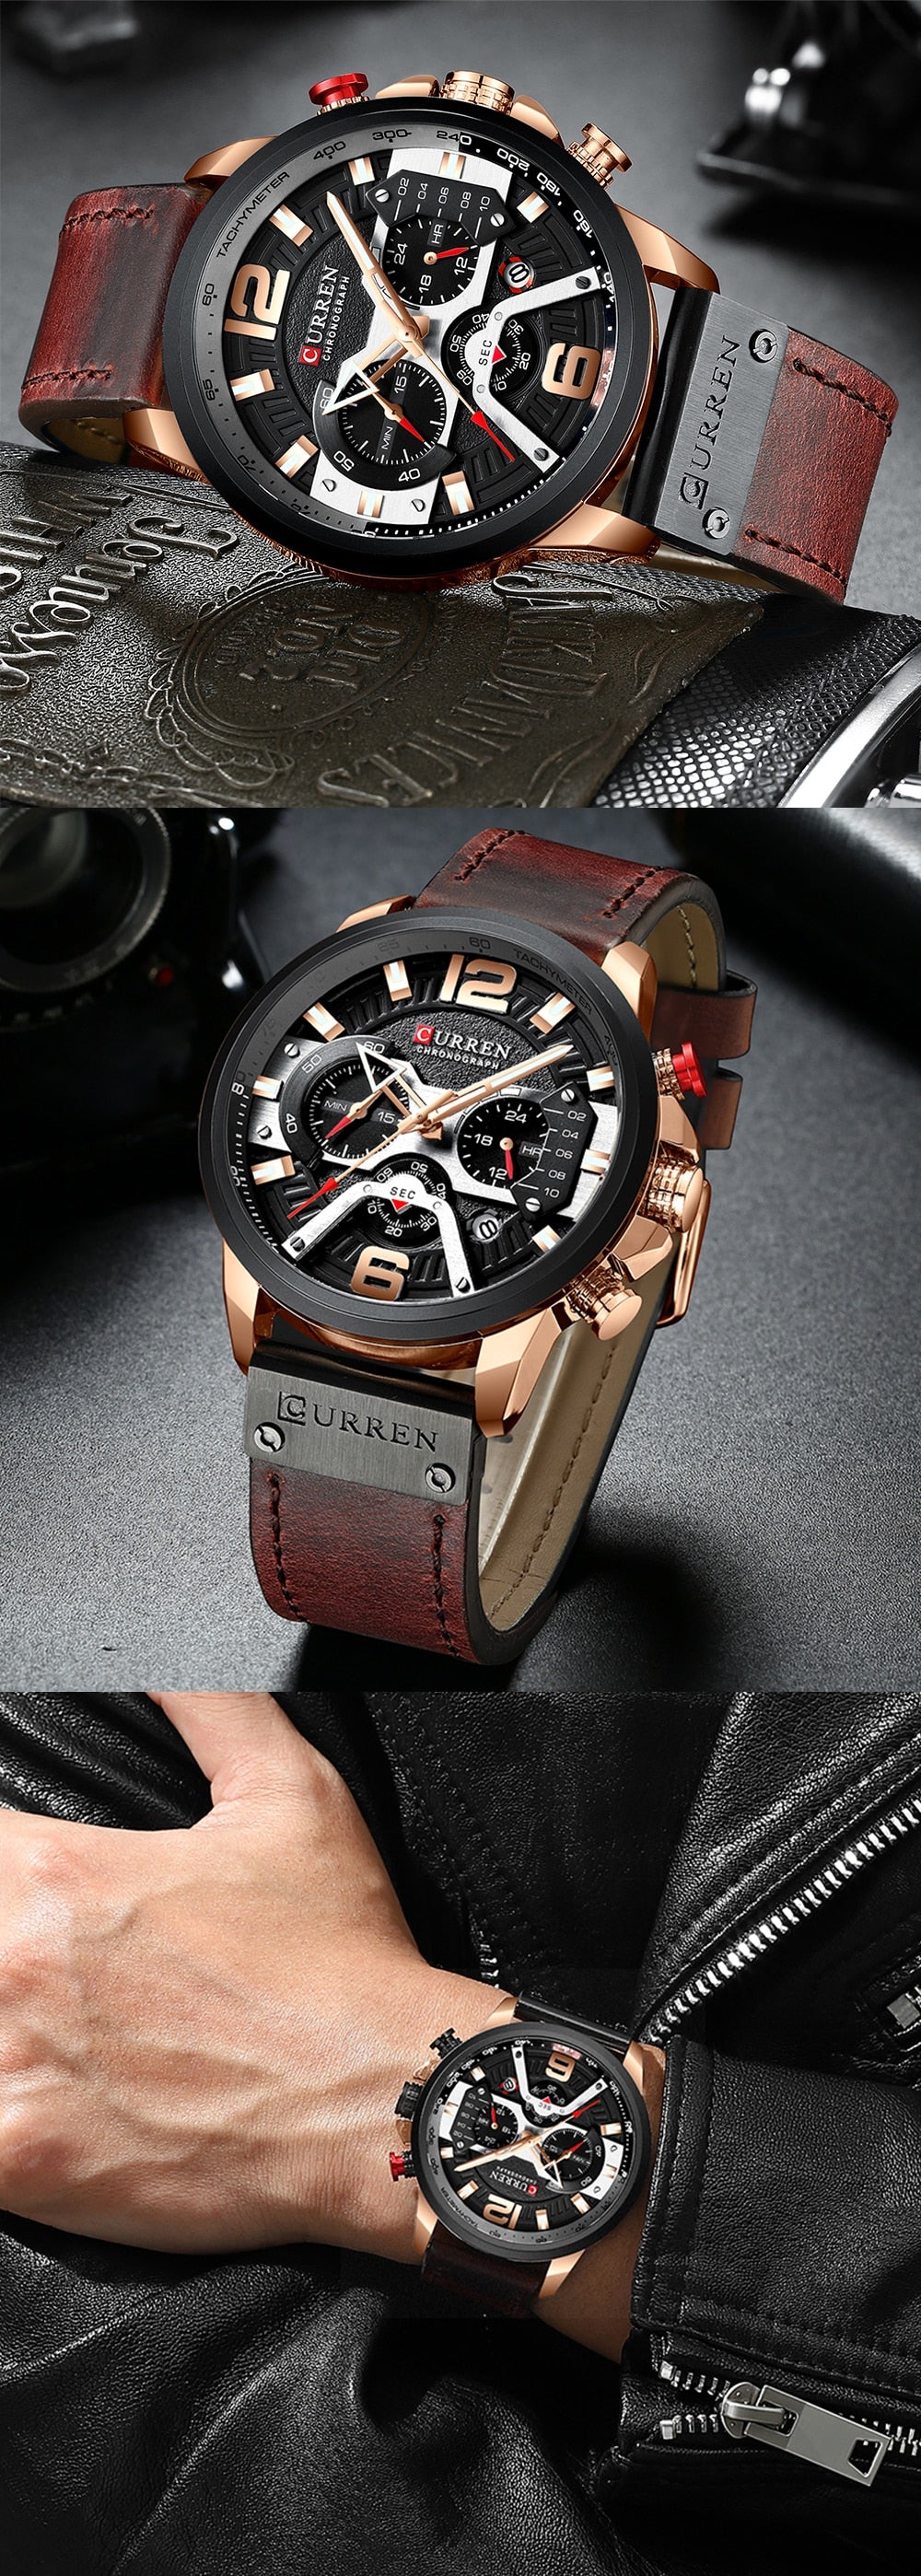 YSYH Casual Sport Watches for Men Blue Luxury Military Leather Wrist Watch Man Clock  Chronograph Wristwatch